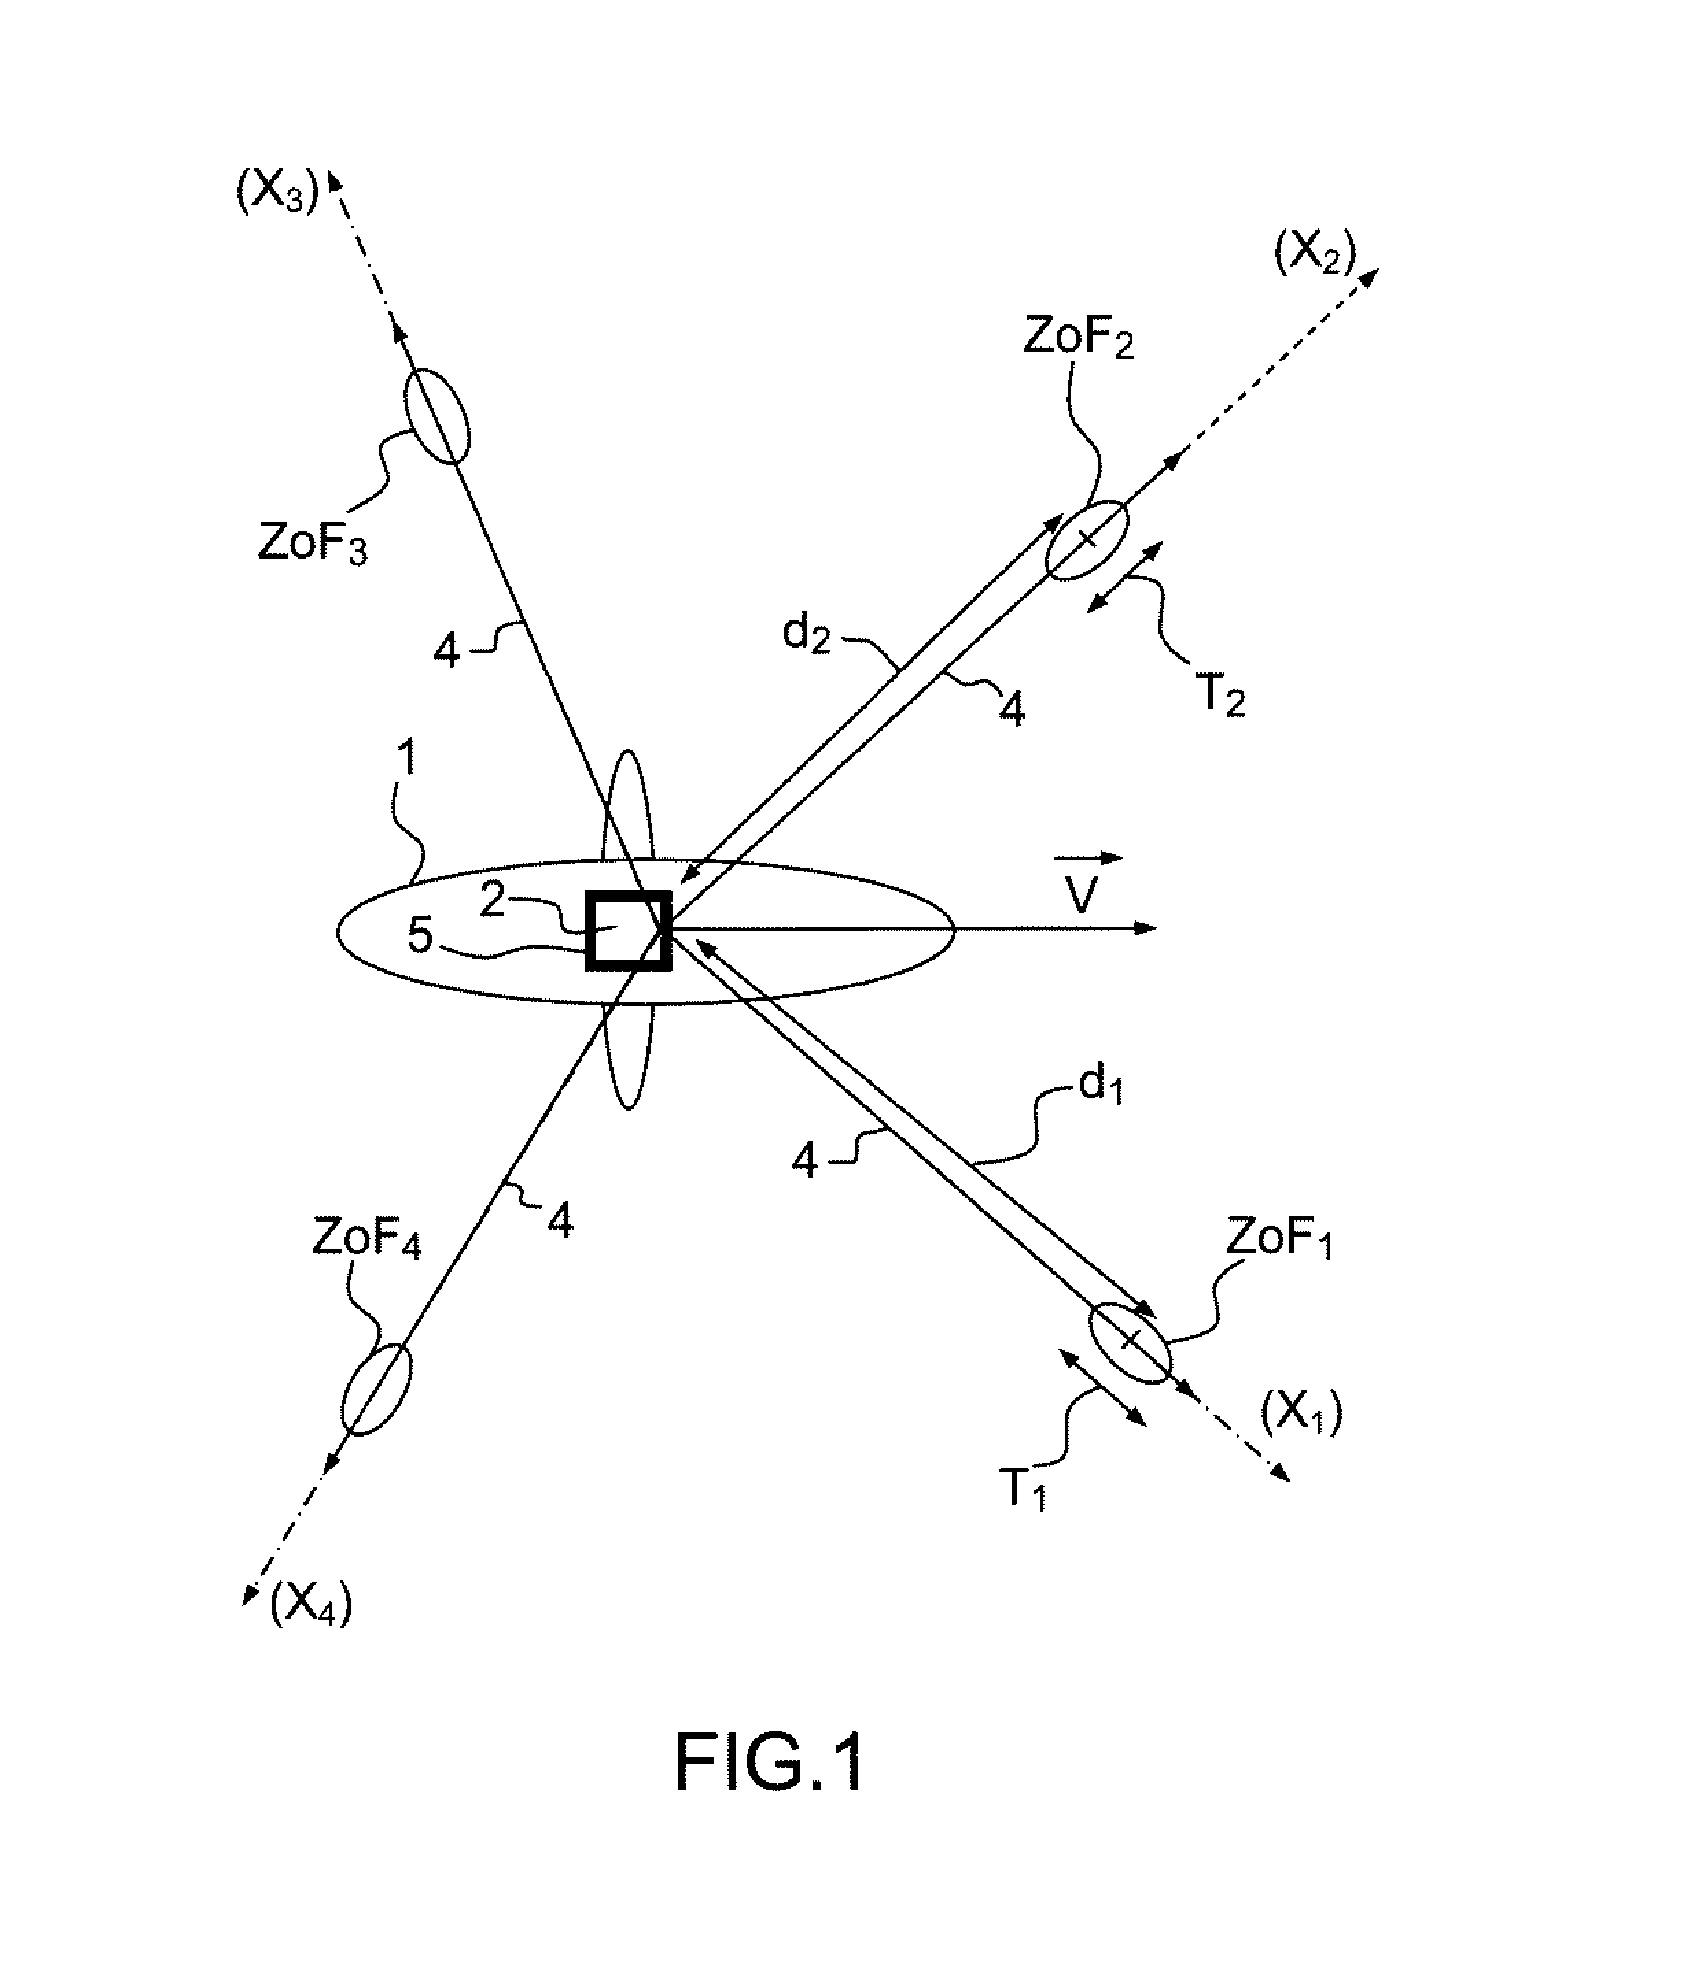 Method of measuring the velocity of an aircraft by laser doppler anemometry